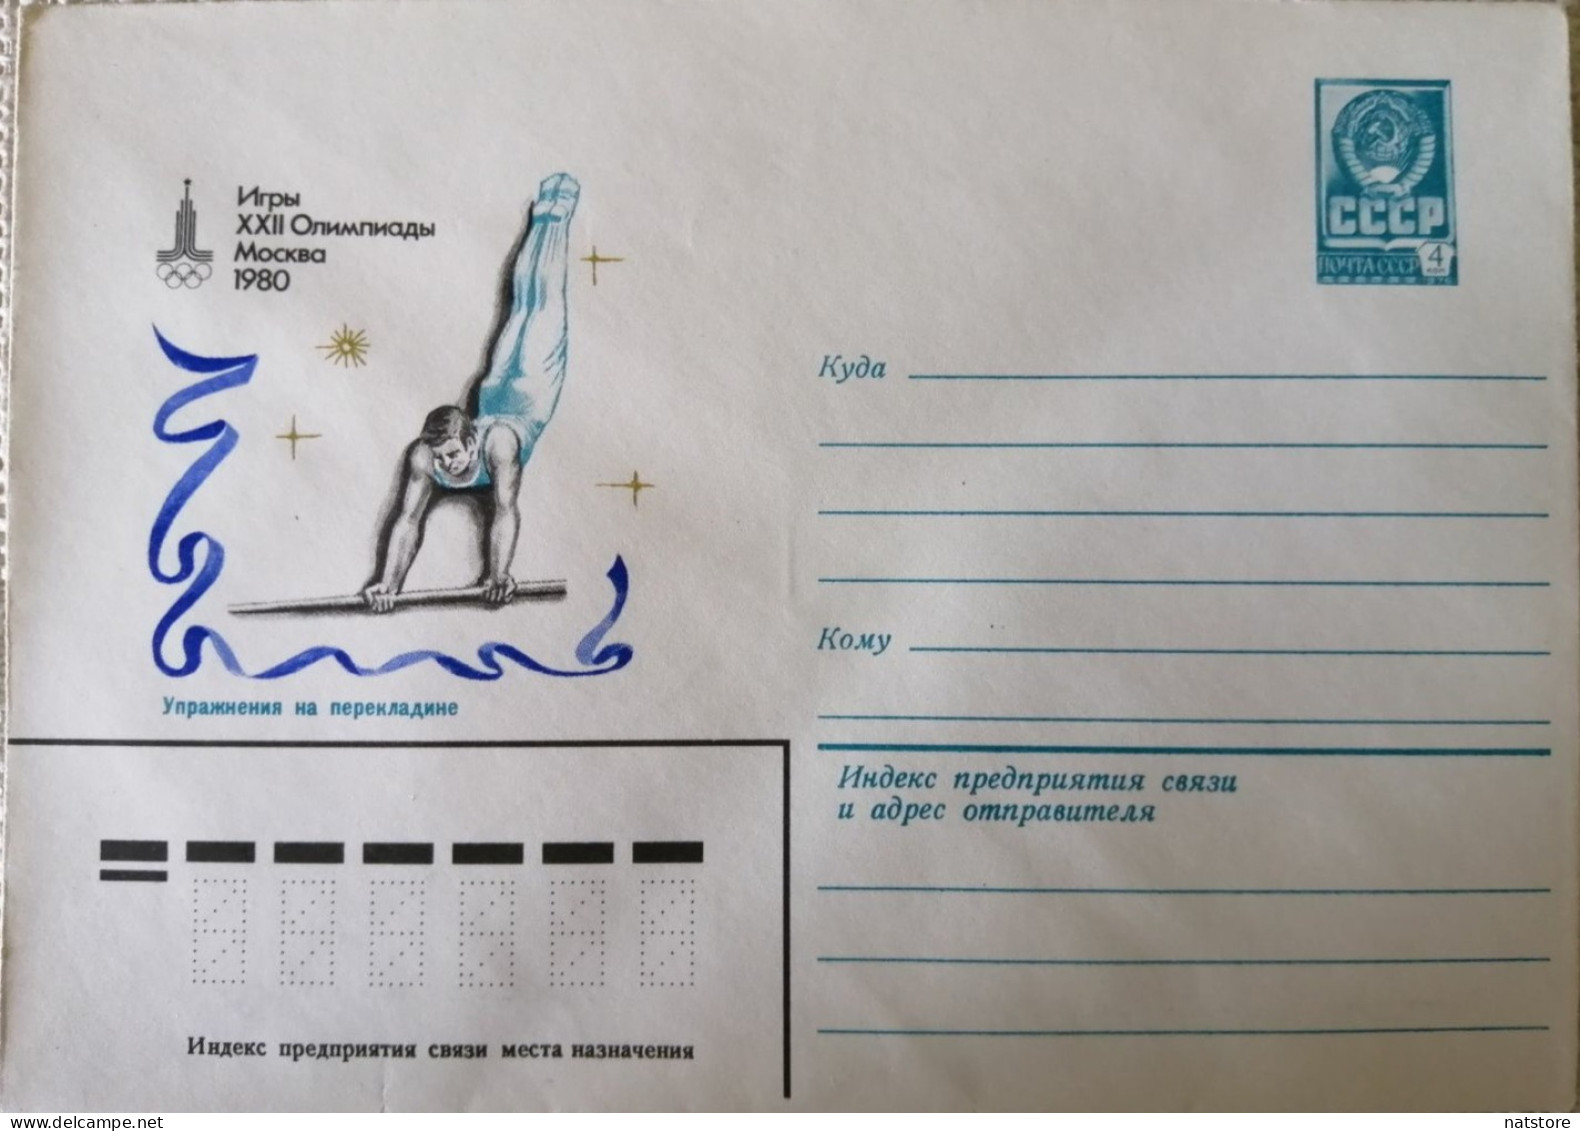 1980 VINTAGE ENVELOPE WITH PRINTED STAMP. " GAMES OF THE XXII OLYMPIAD.MOSCOW...1980"  CROSSBAR EXERCISES   . NEW. - Verano 1980: Moscu